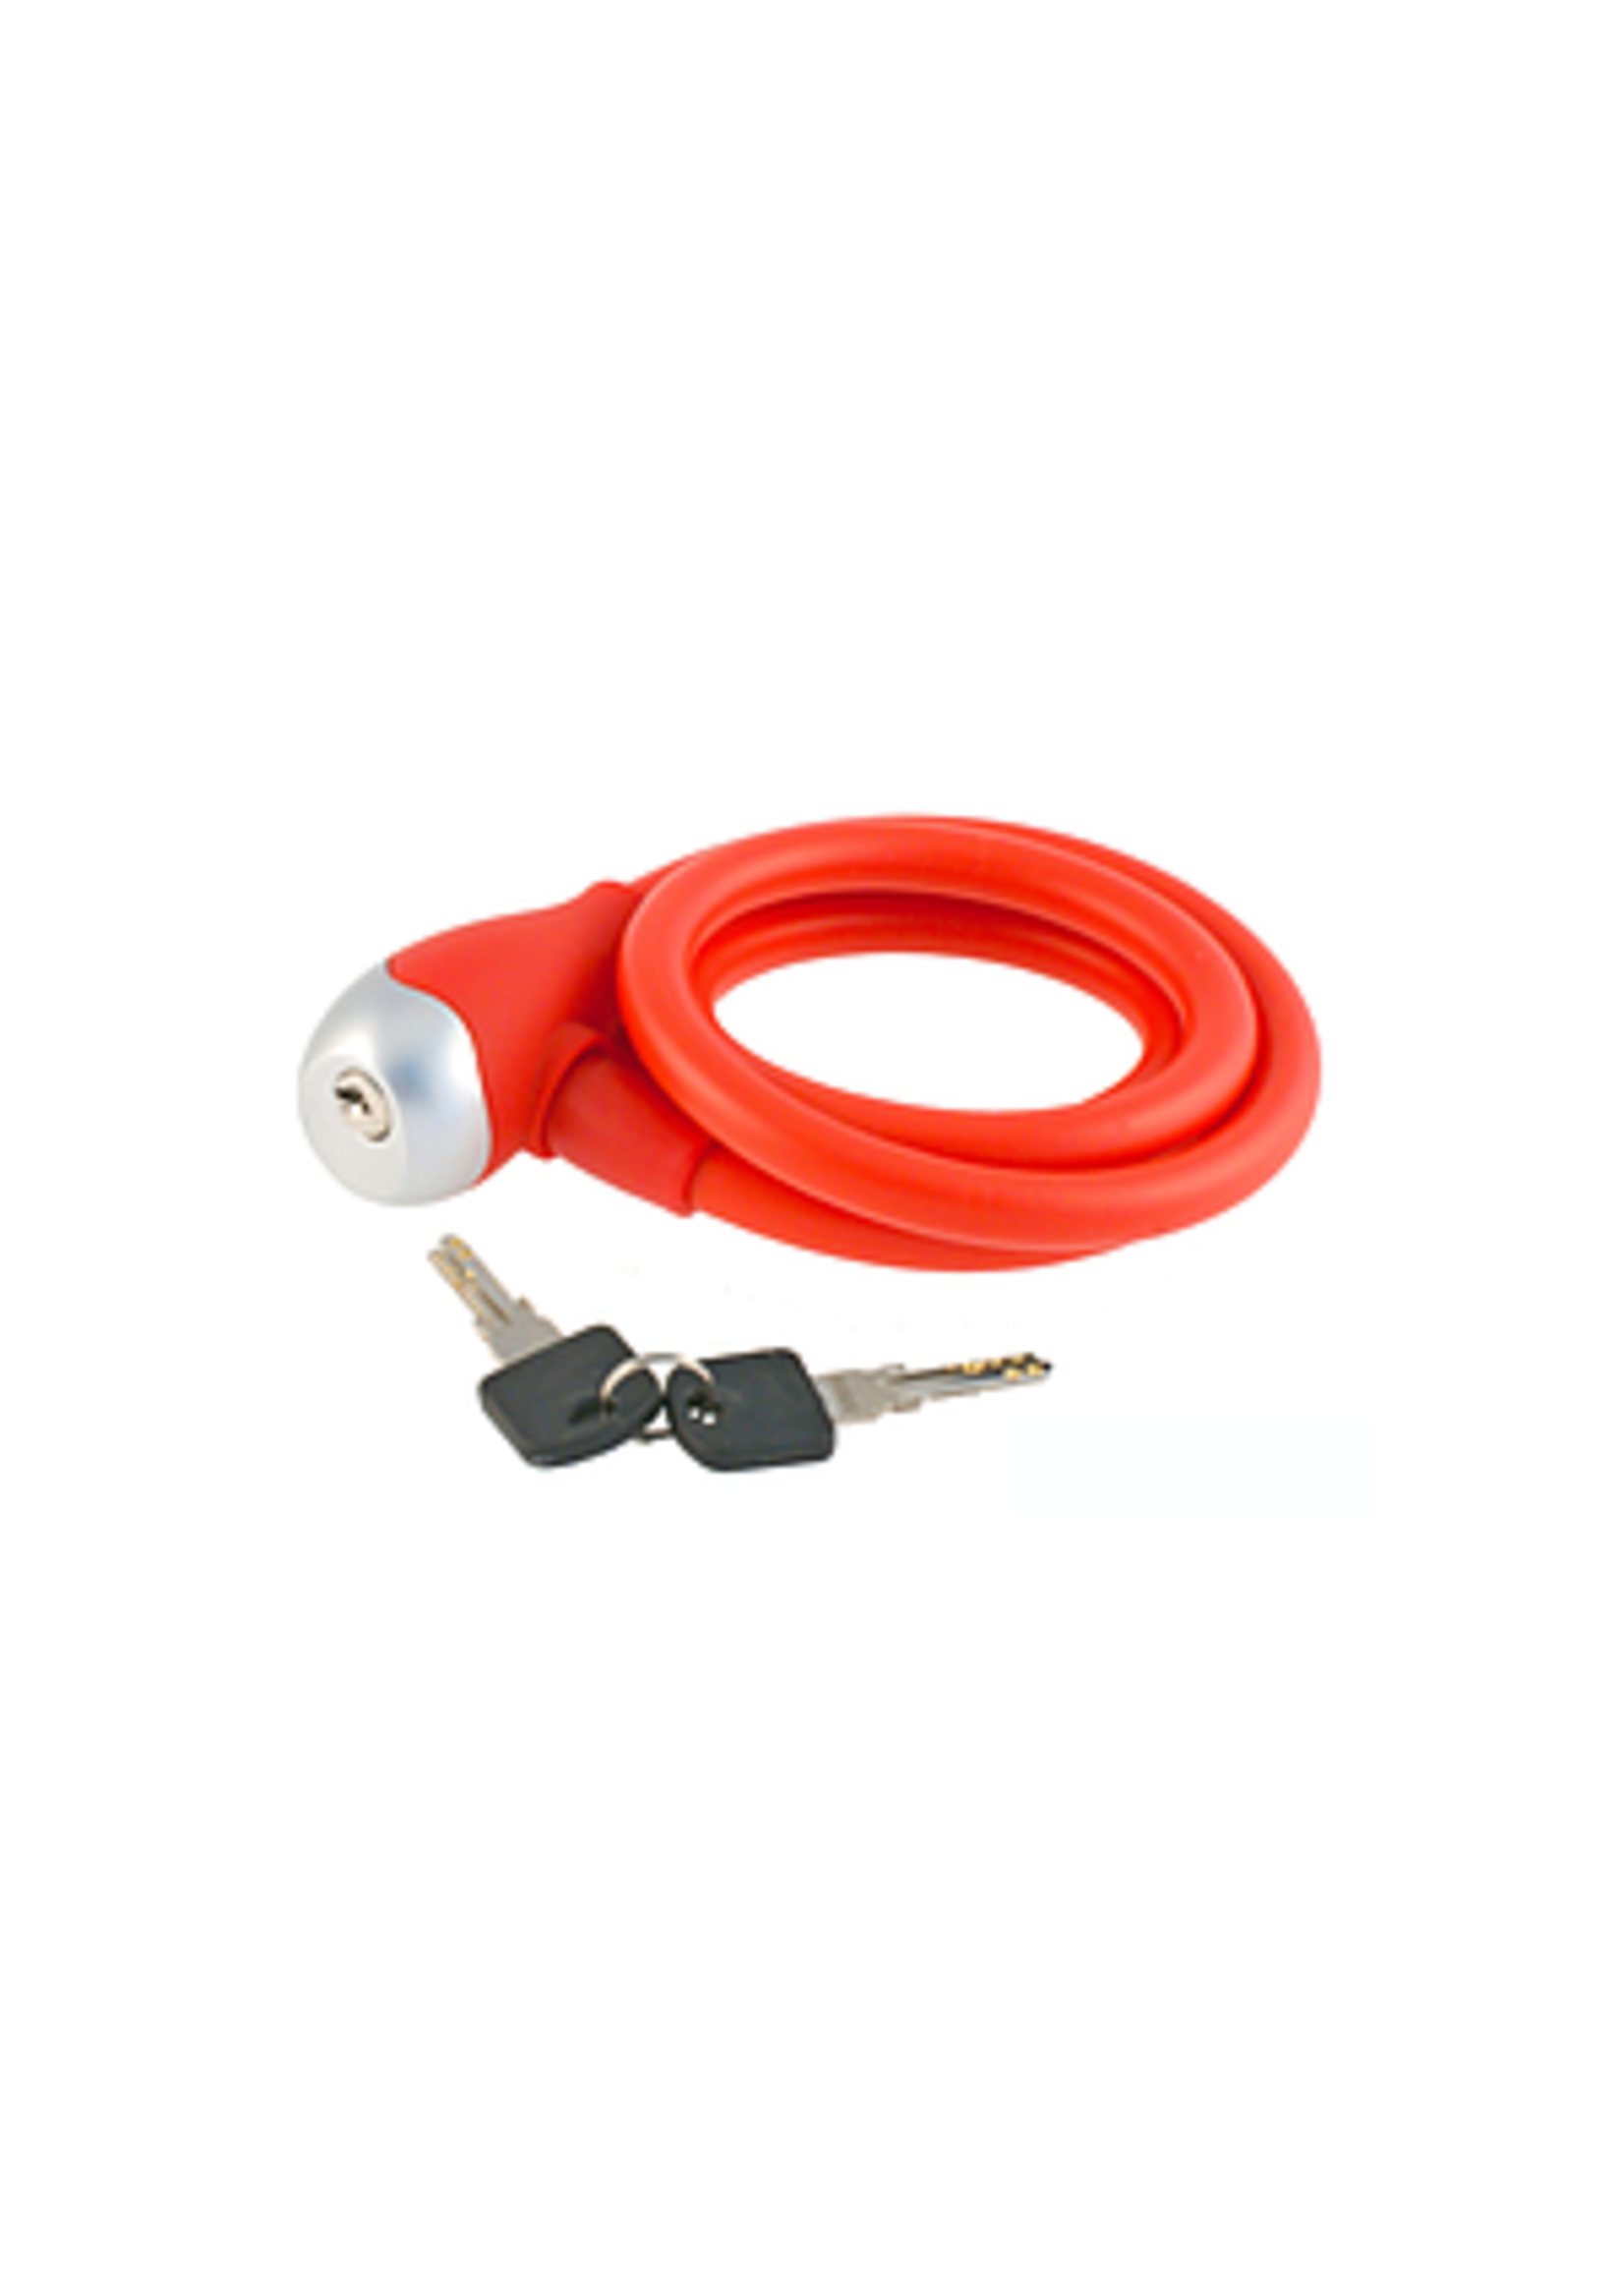 wag WAG SPIRAL SILICON CABLE LOCK 12 x 1200 mm